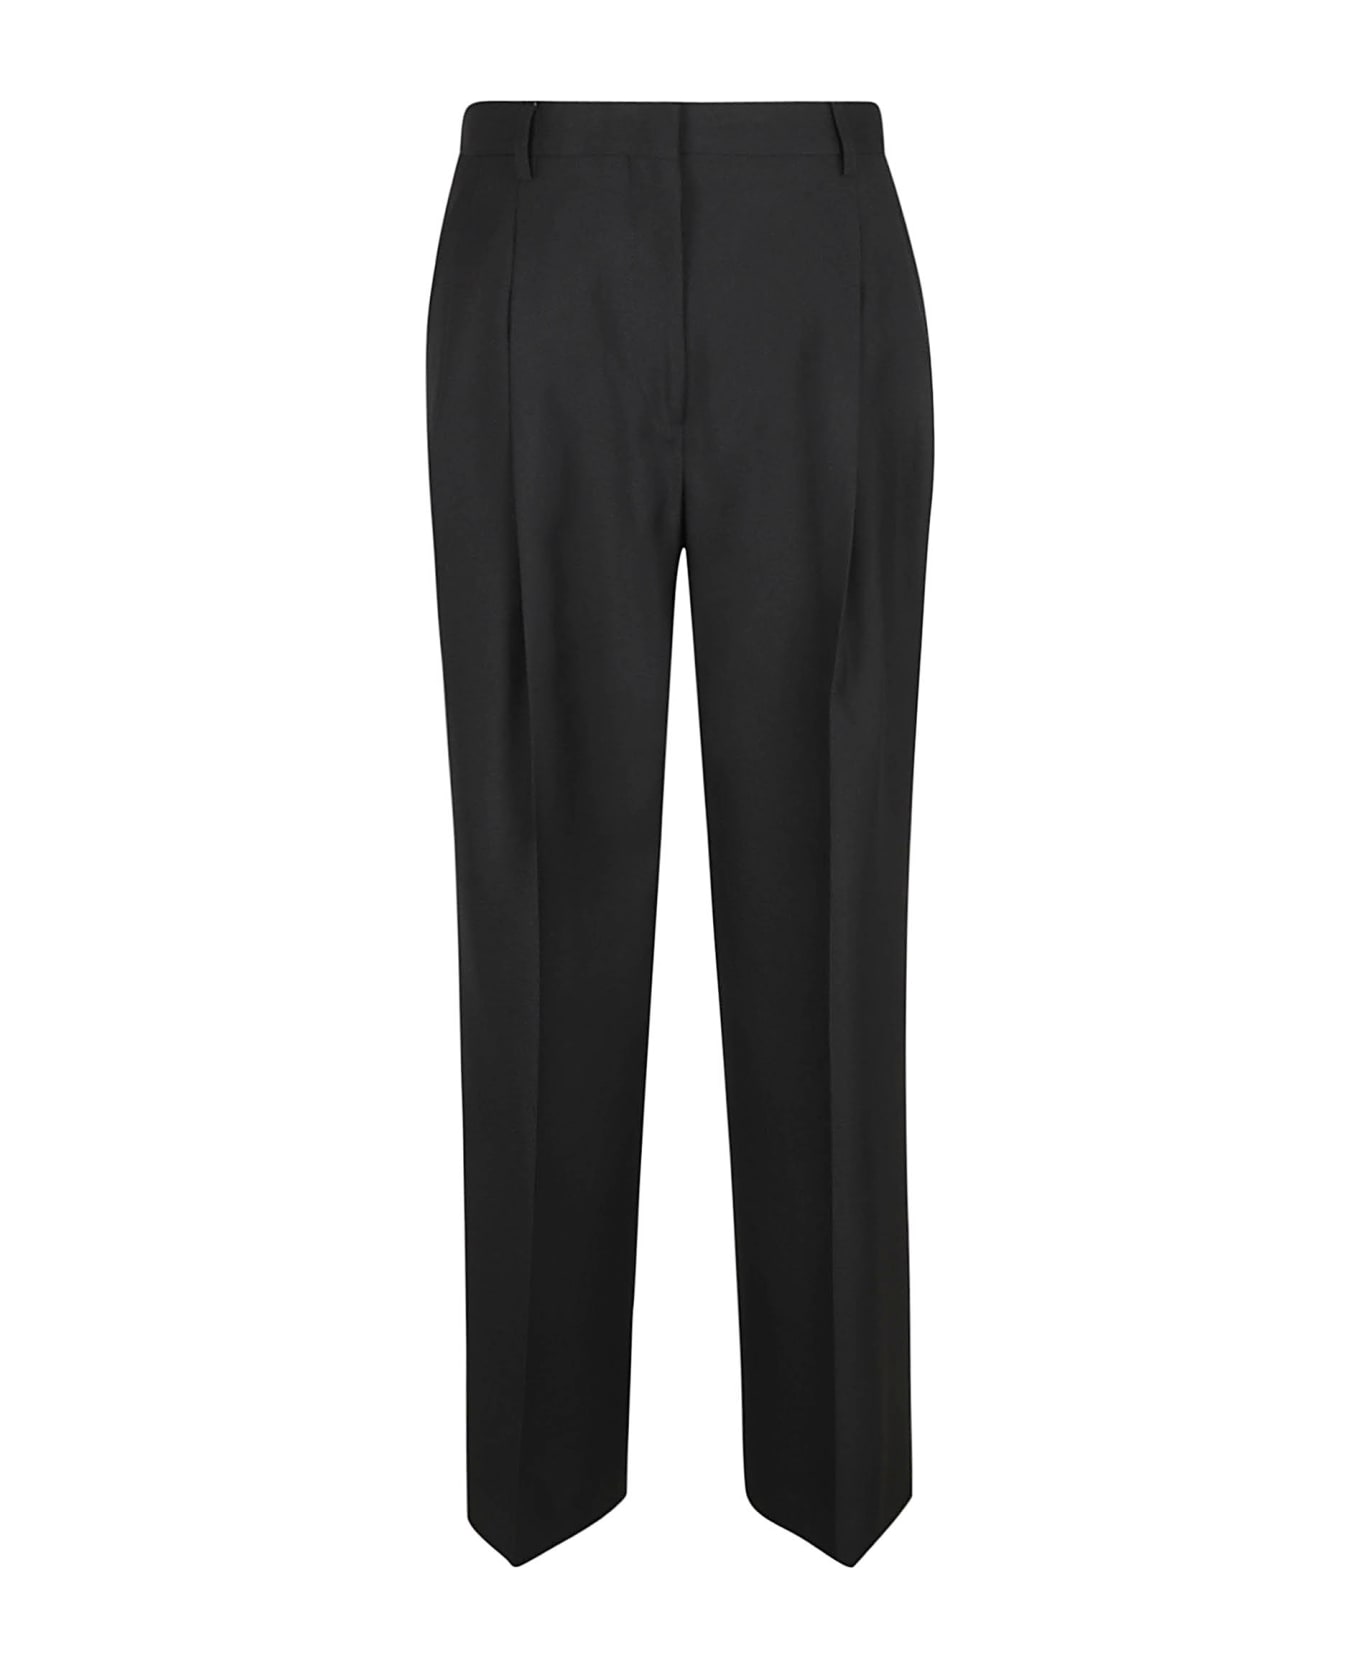 Burberry Madge Trousers - BLACK ボトムス